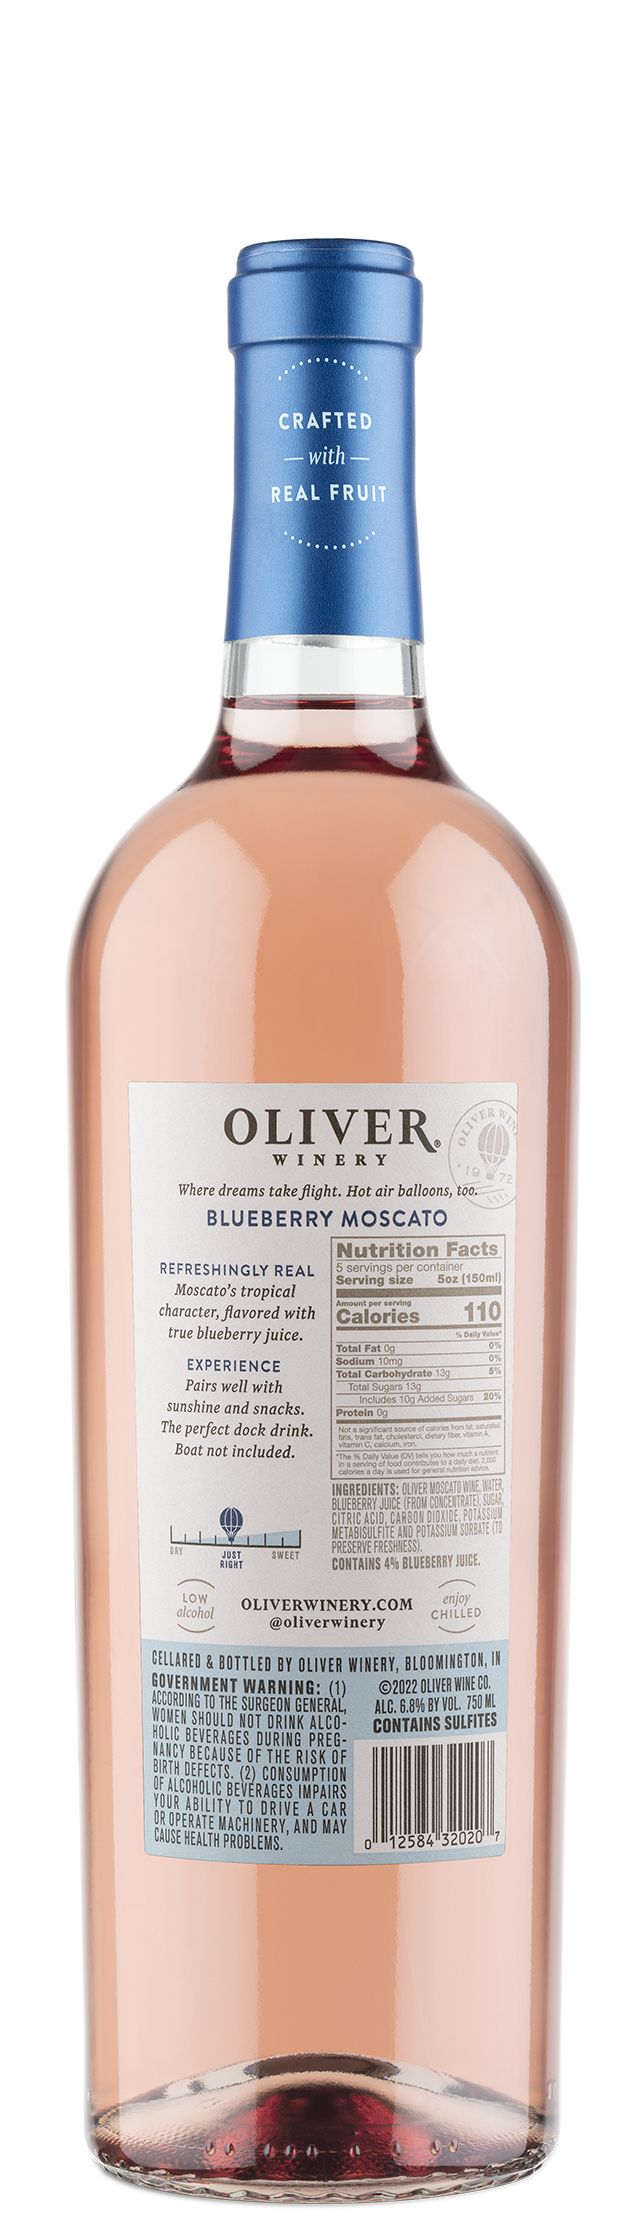 Oliver Winery Vine Series Blueberry Moscato Nutrition Information